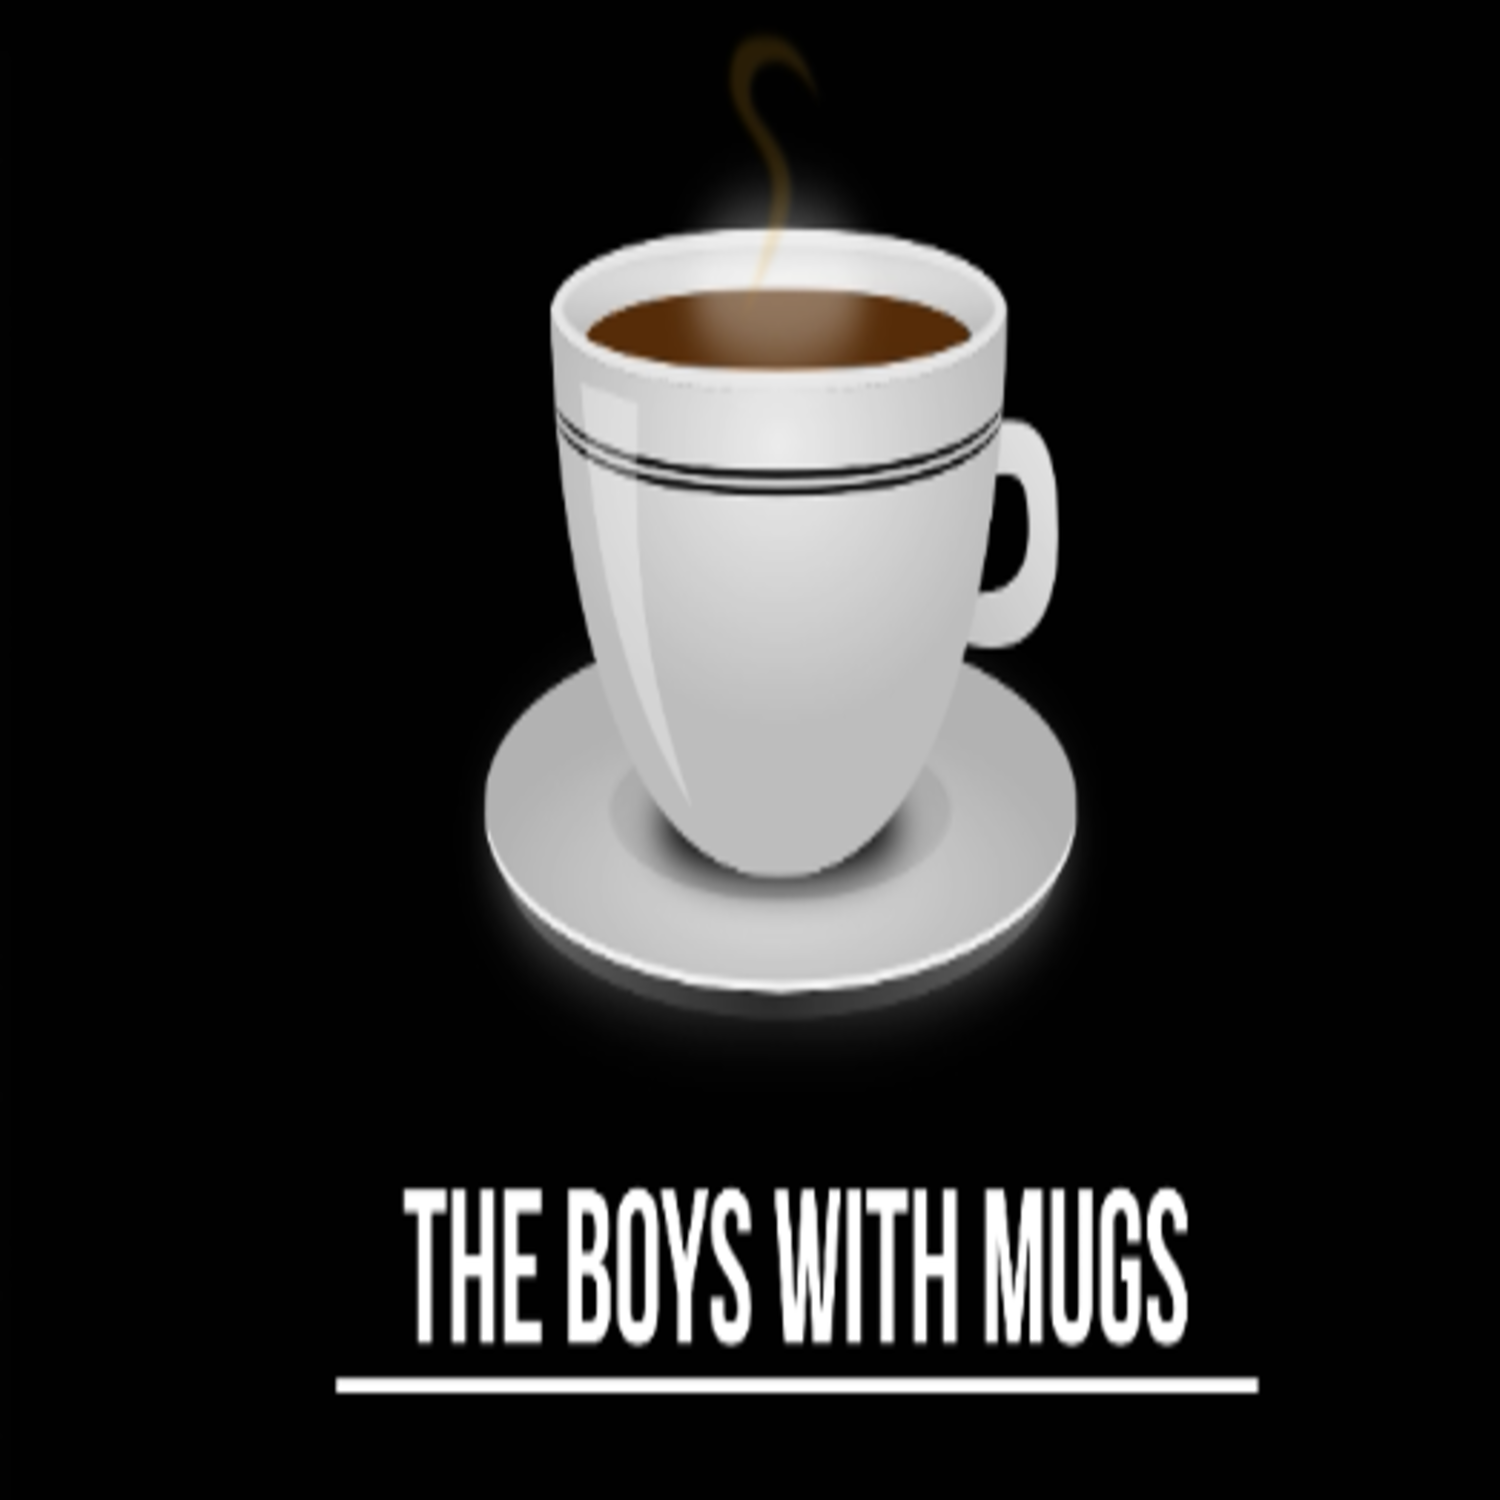 The Boys With Mugs